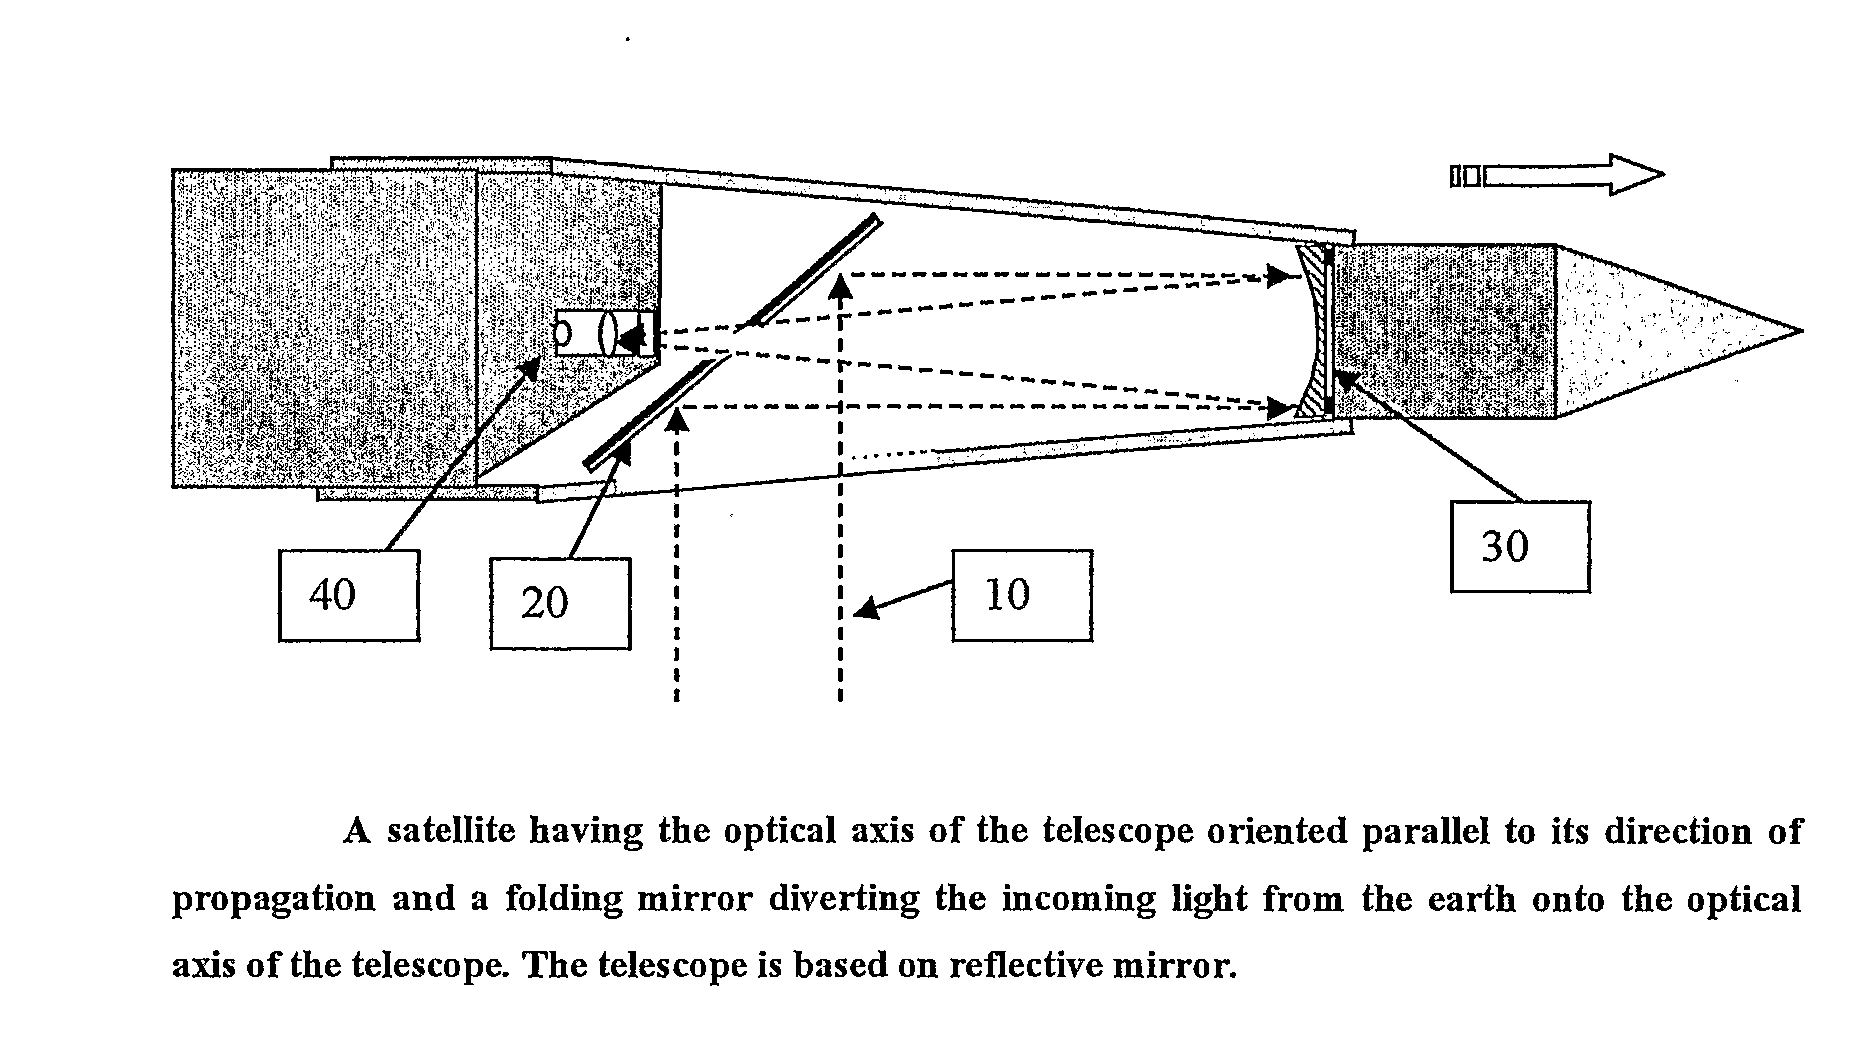 Low orbit missile-shaped satellite for electro-optical earth surveillance and other missions